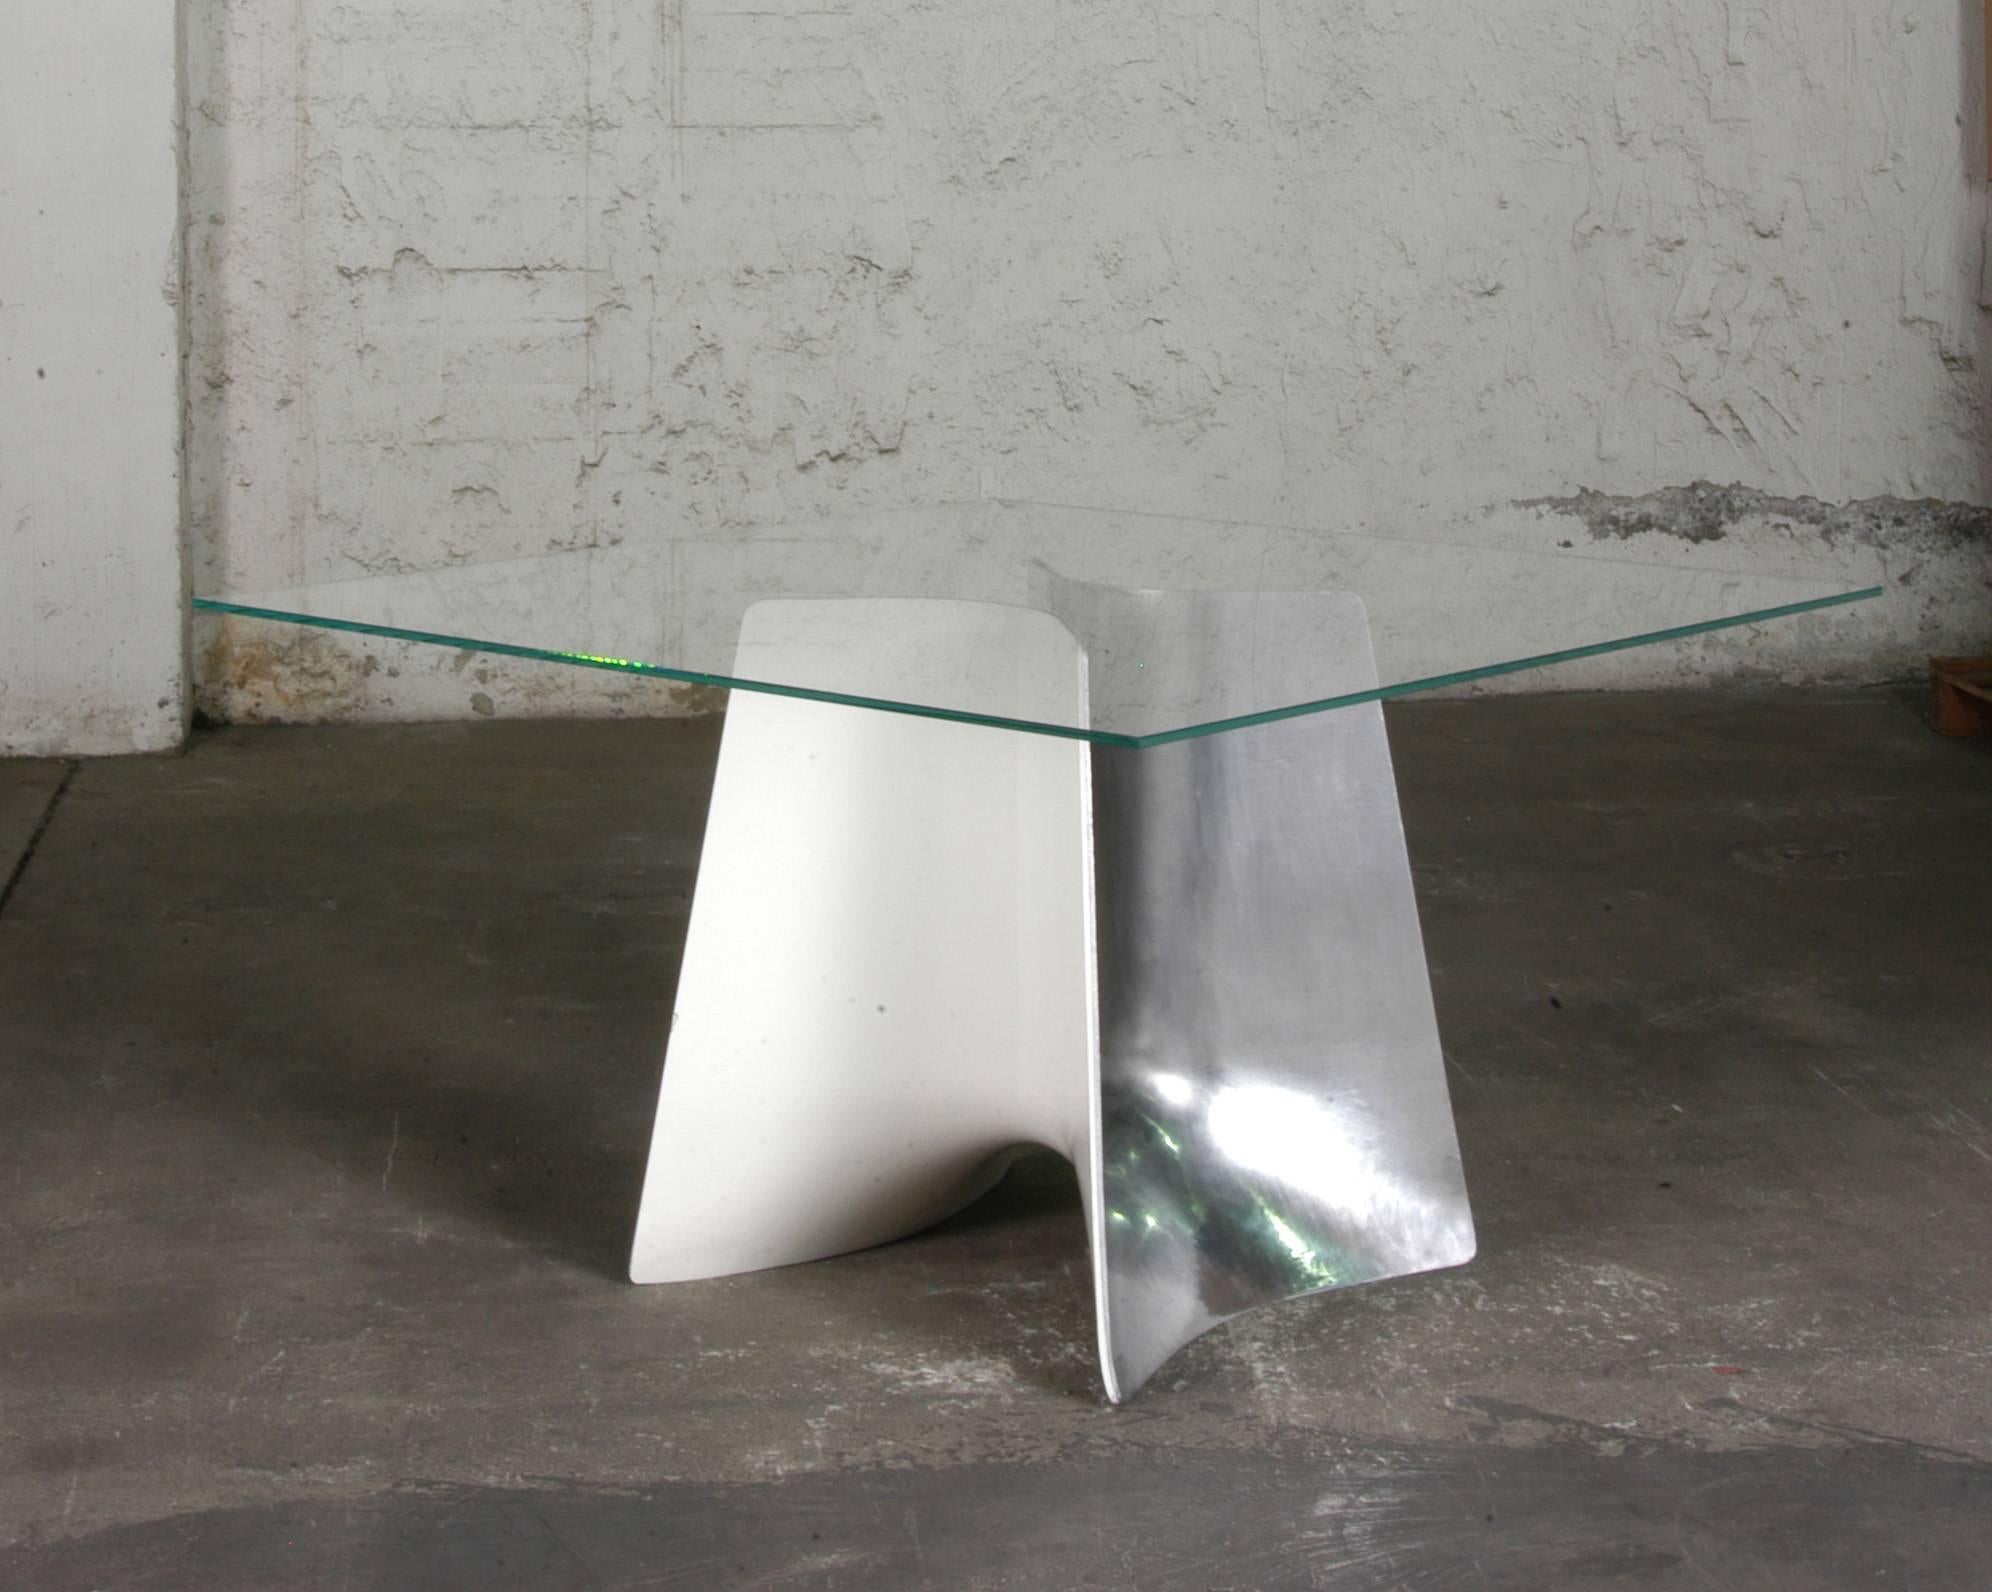 Bentz High Square Aluminum Table W/ Glass Top by Jeff Miller In New Condition For Sale In Milano, Lombardia